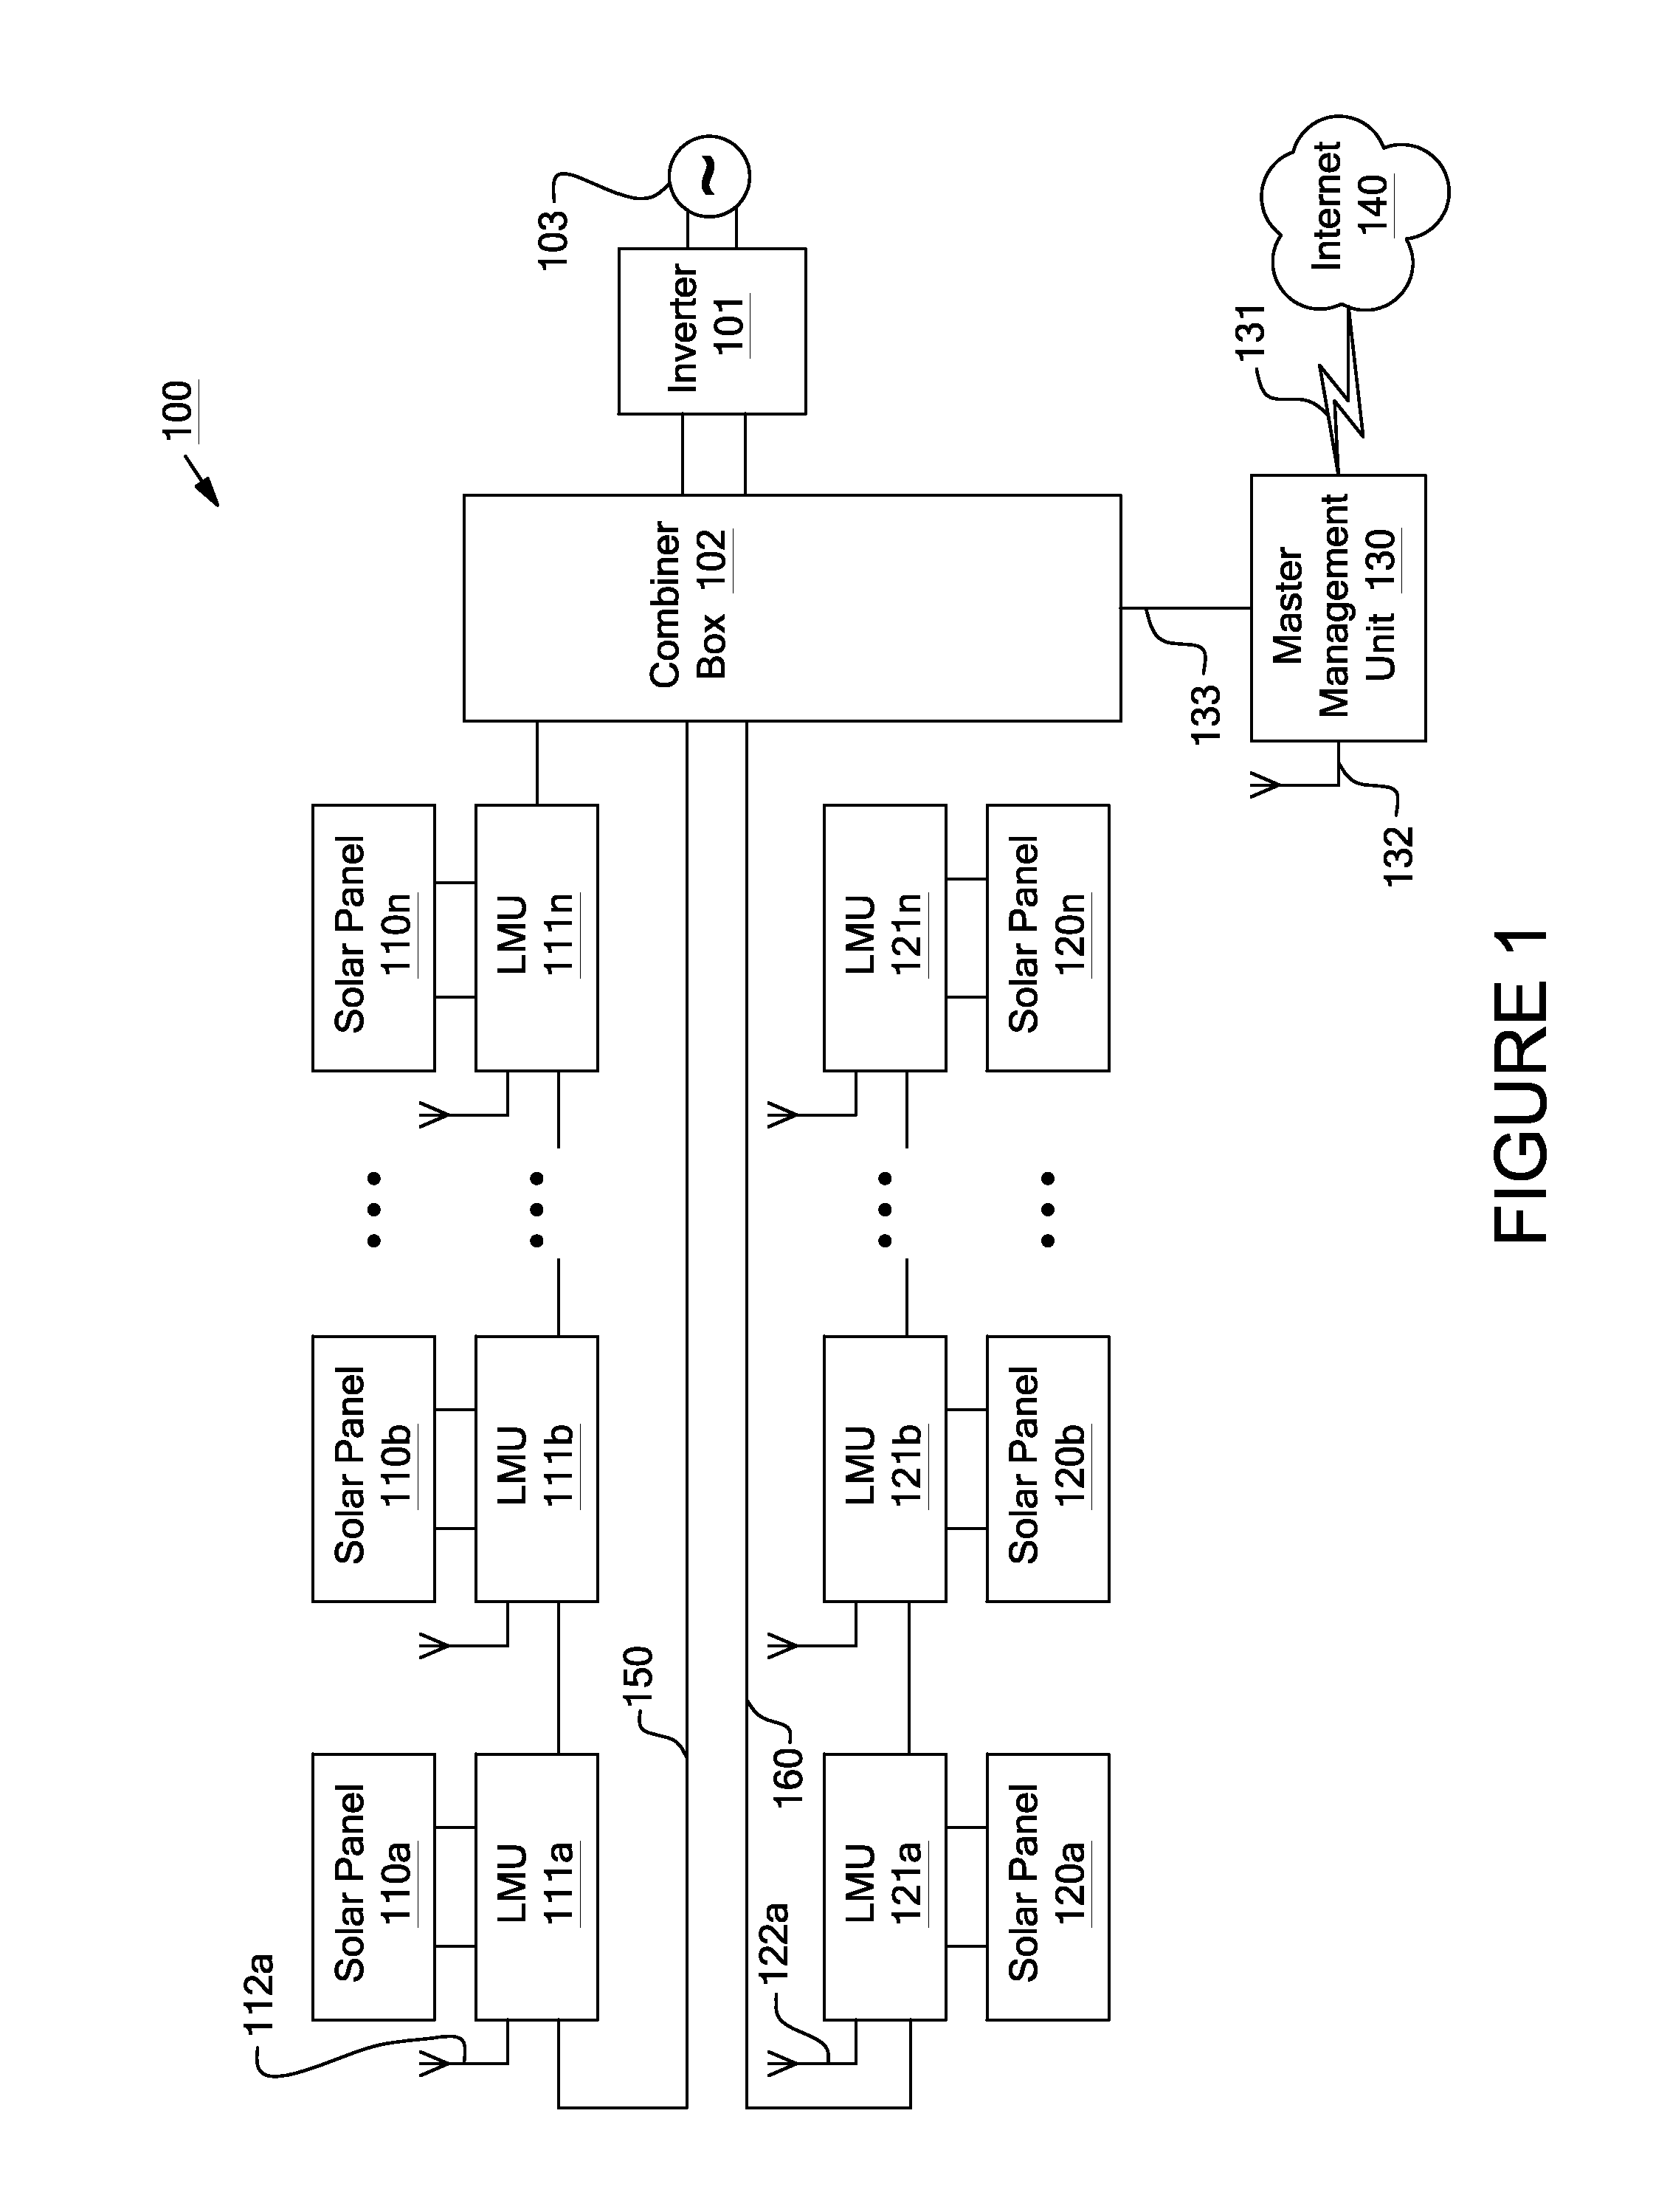 Systems and Methods for an Identification Protocol Between a Local Controller and a Master Controller